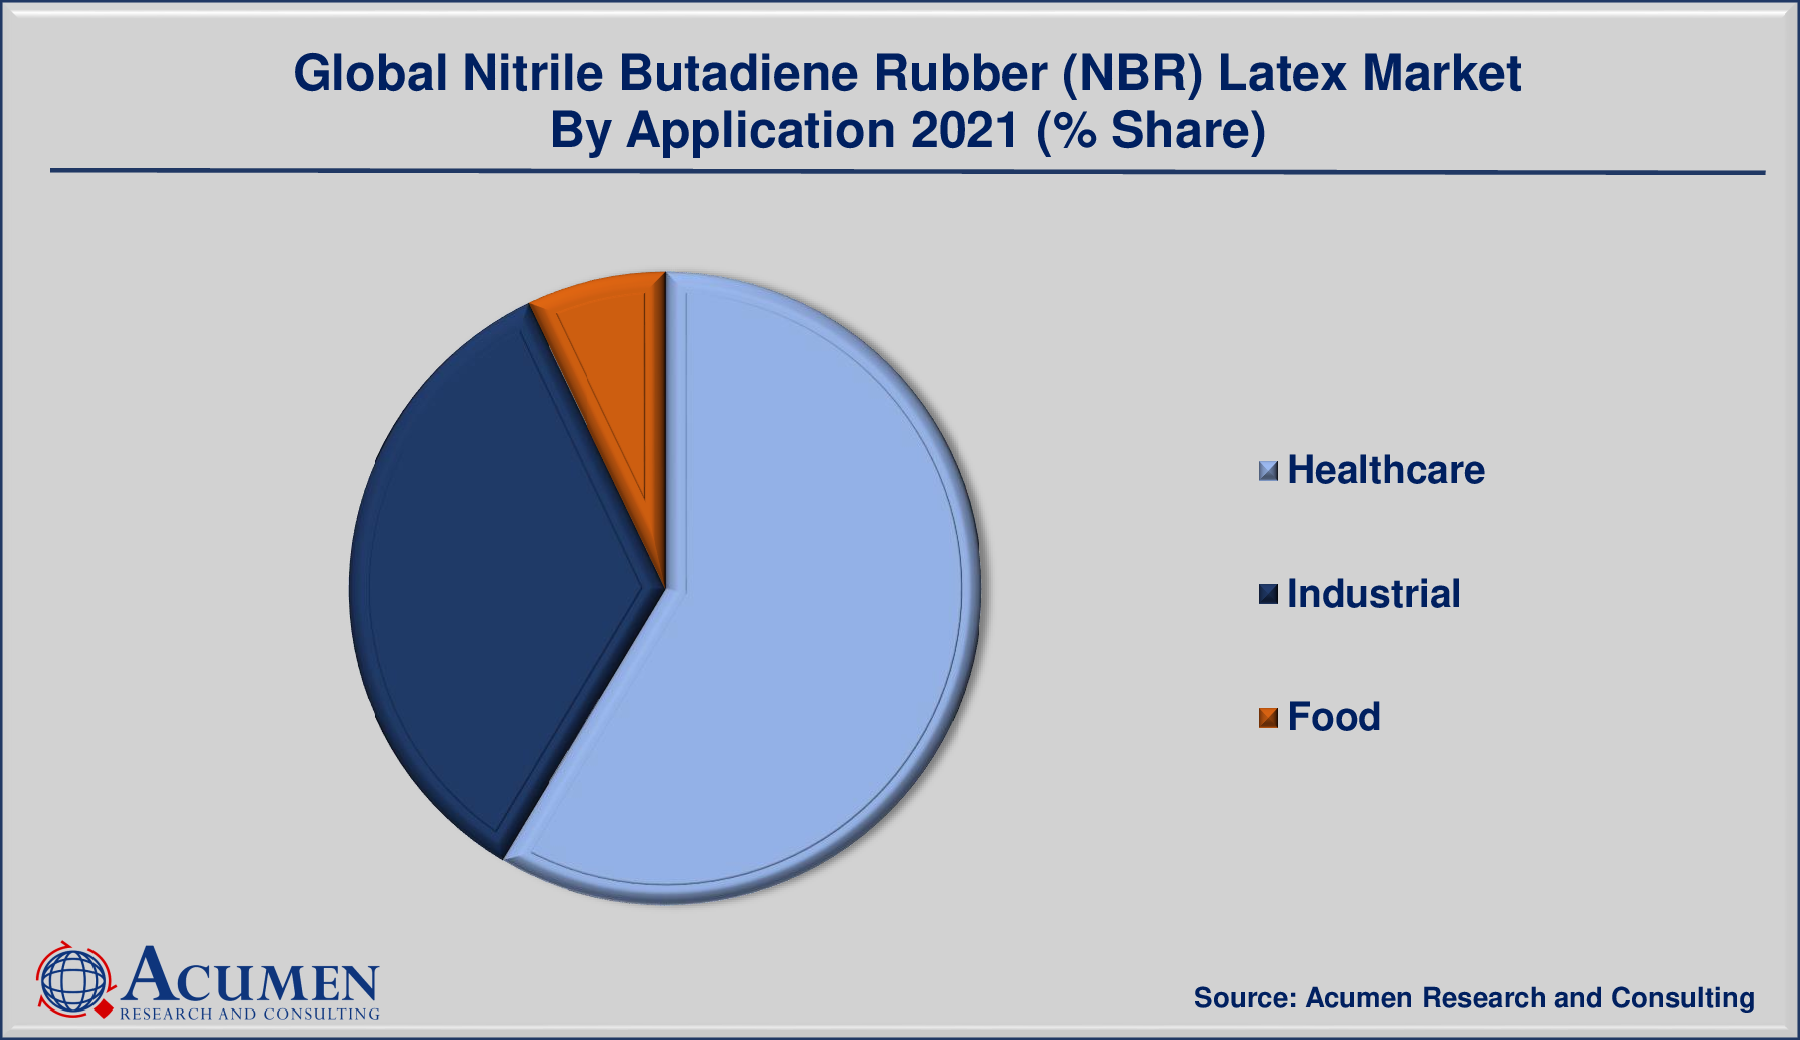 Nitrile Butadiene Rubber Latex Market By Application is predicted to be worth USD 3,014 Million by 2028, with a CAGR of 10.6%